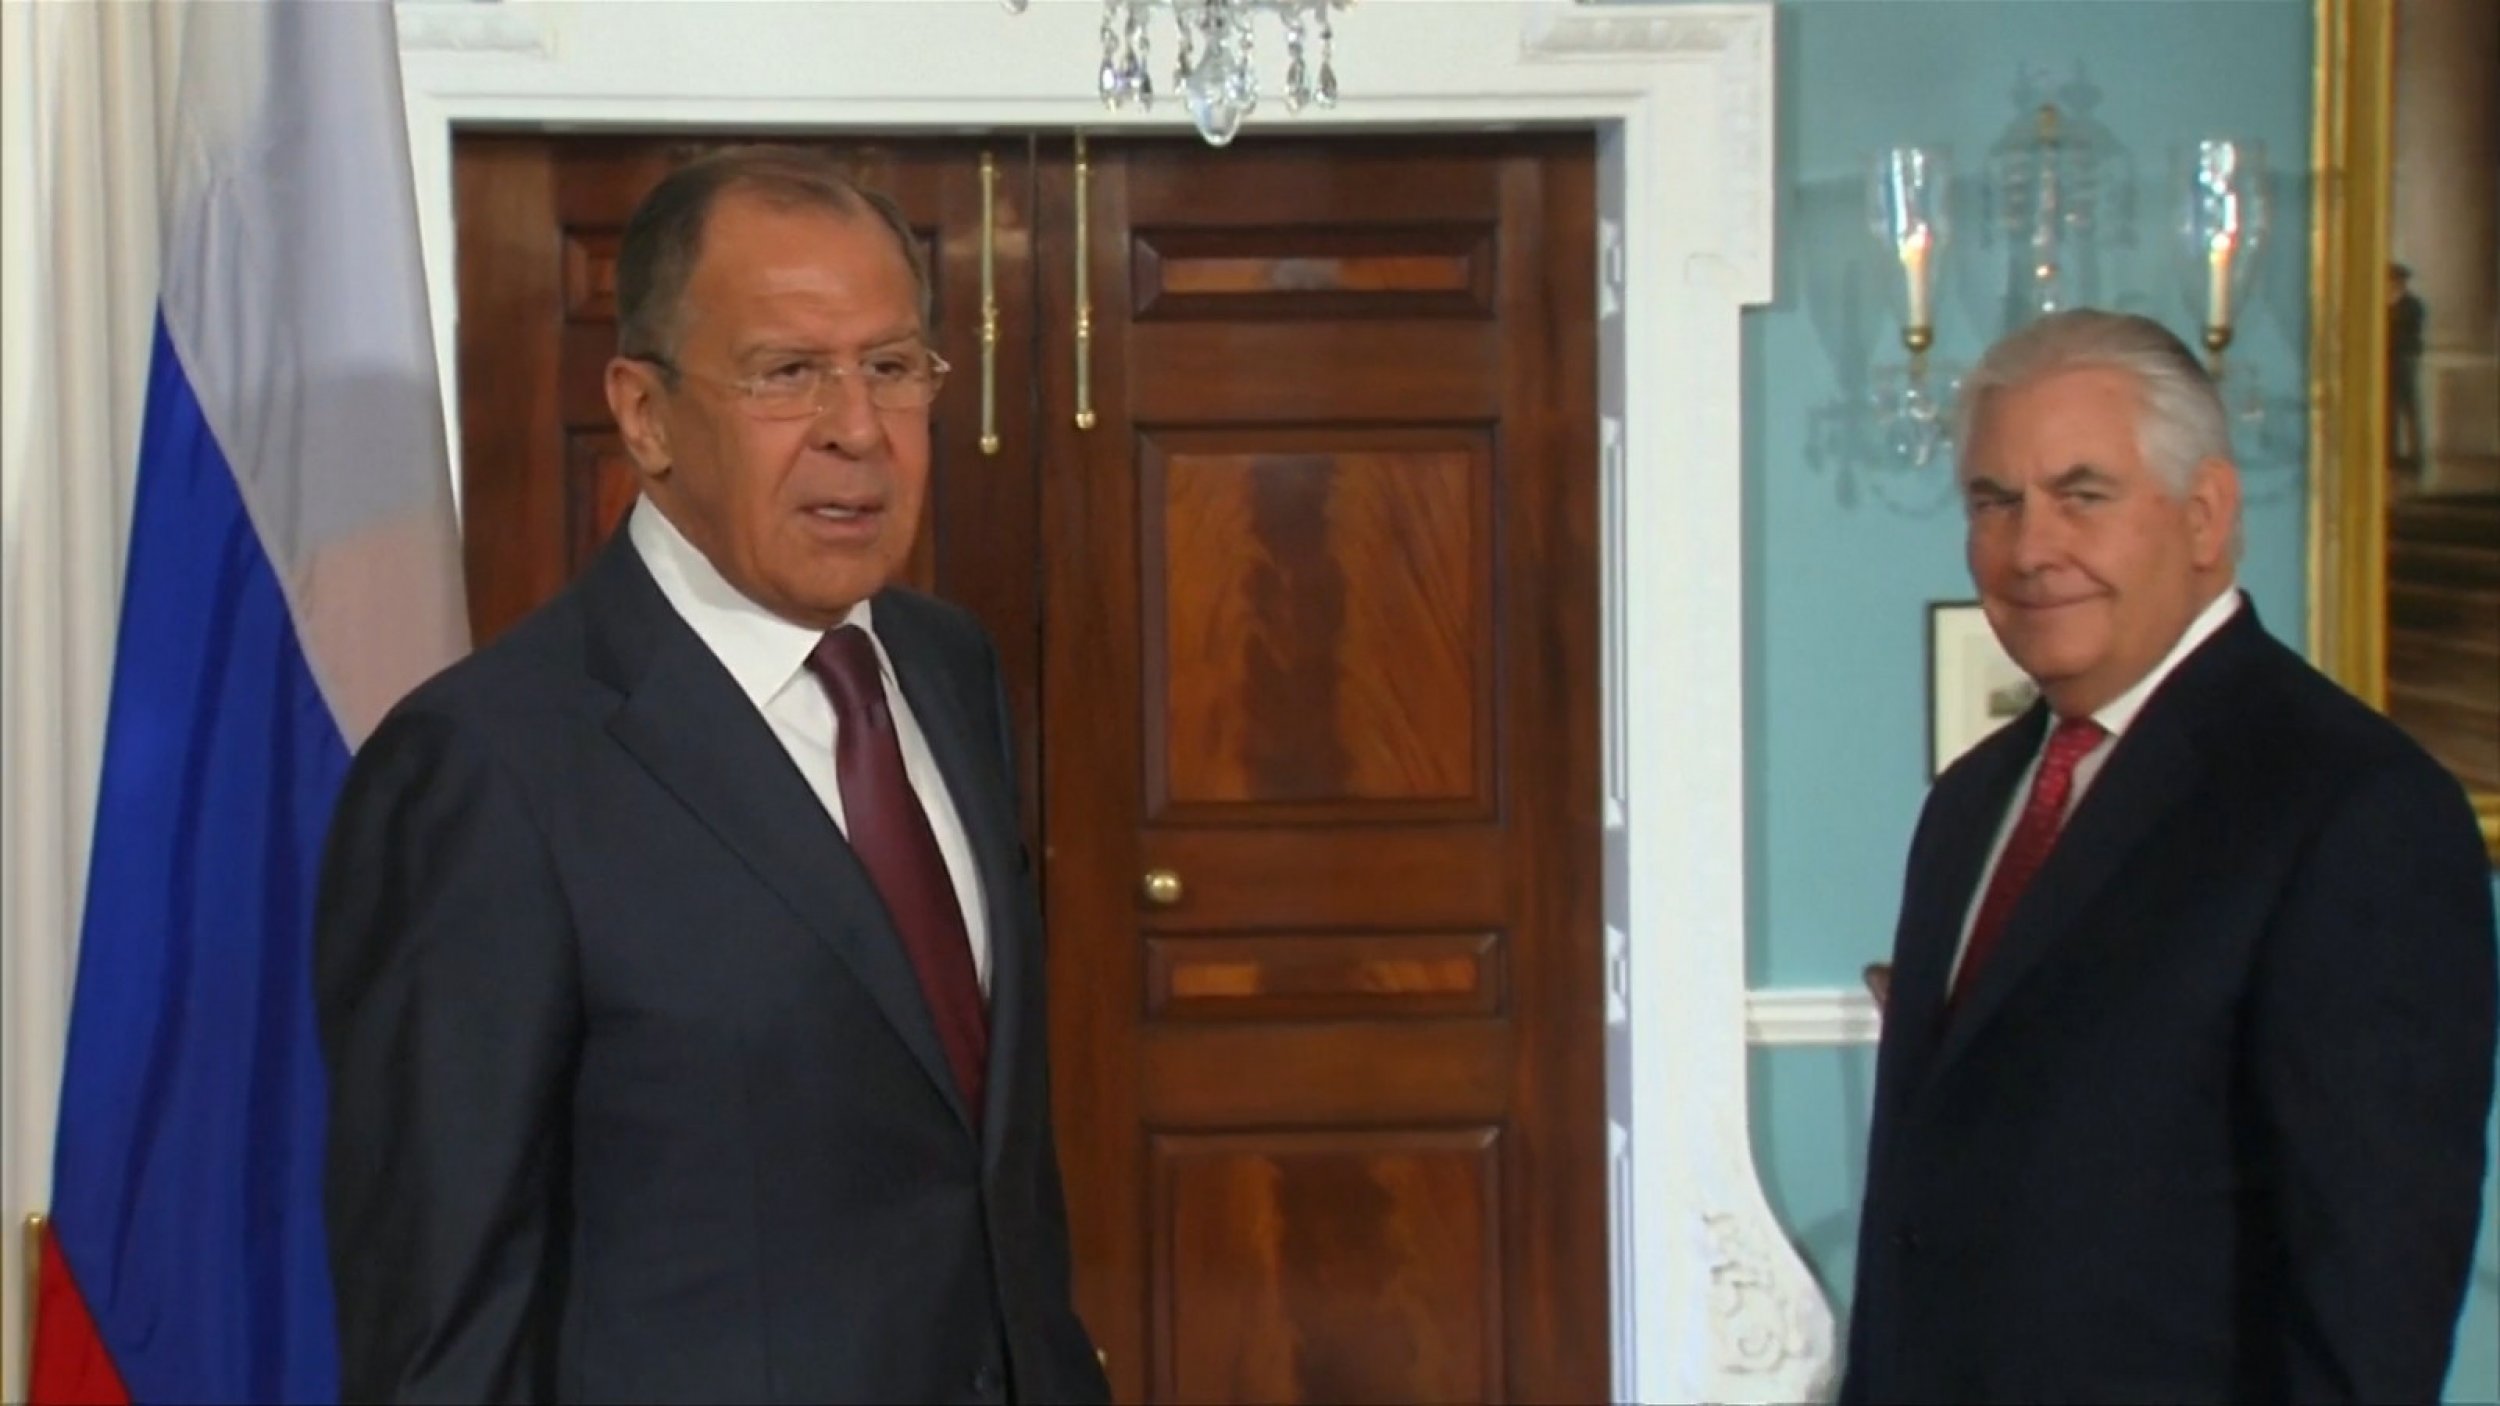 Was he fired Youre kidding Russia foreign minister Sergei Lavrov reacts to James Comey sacking